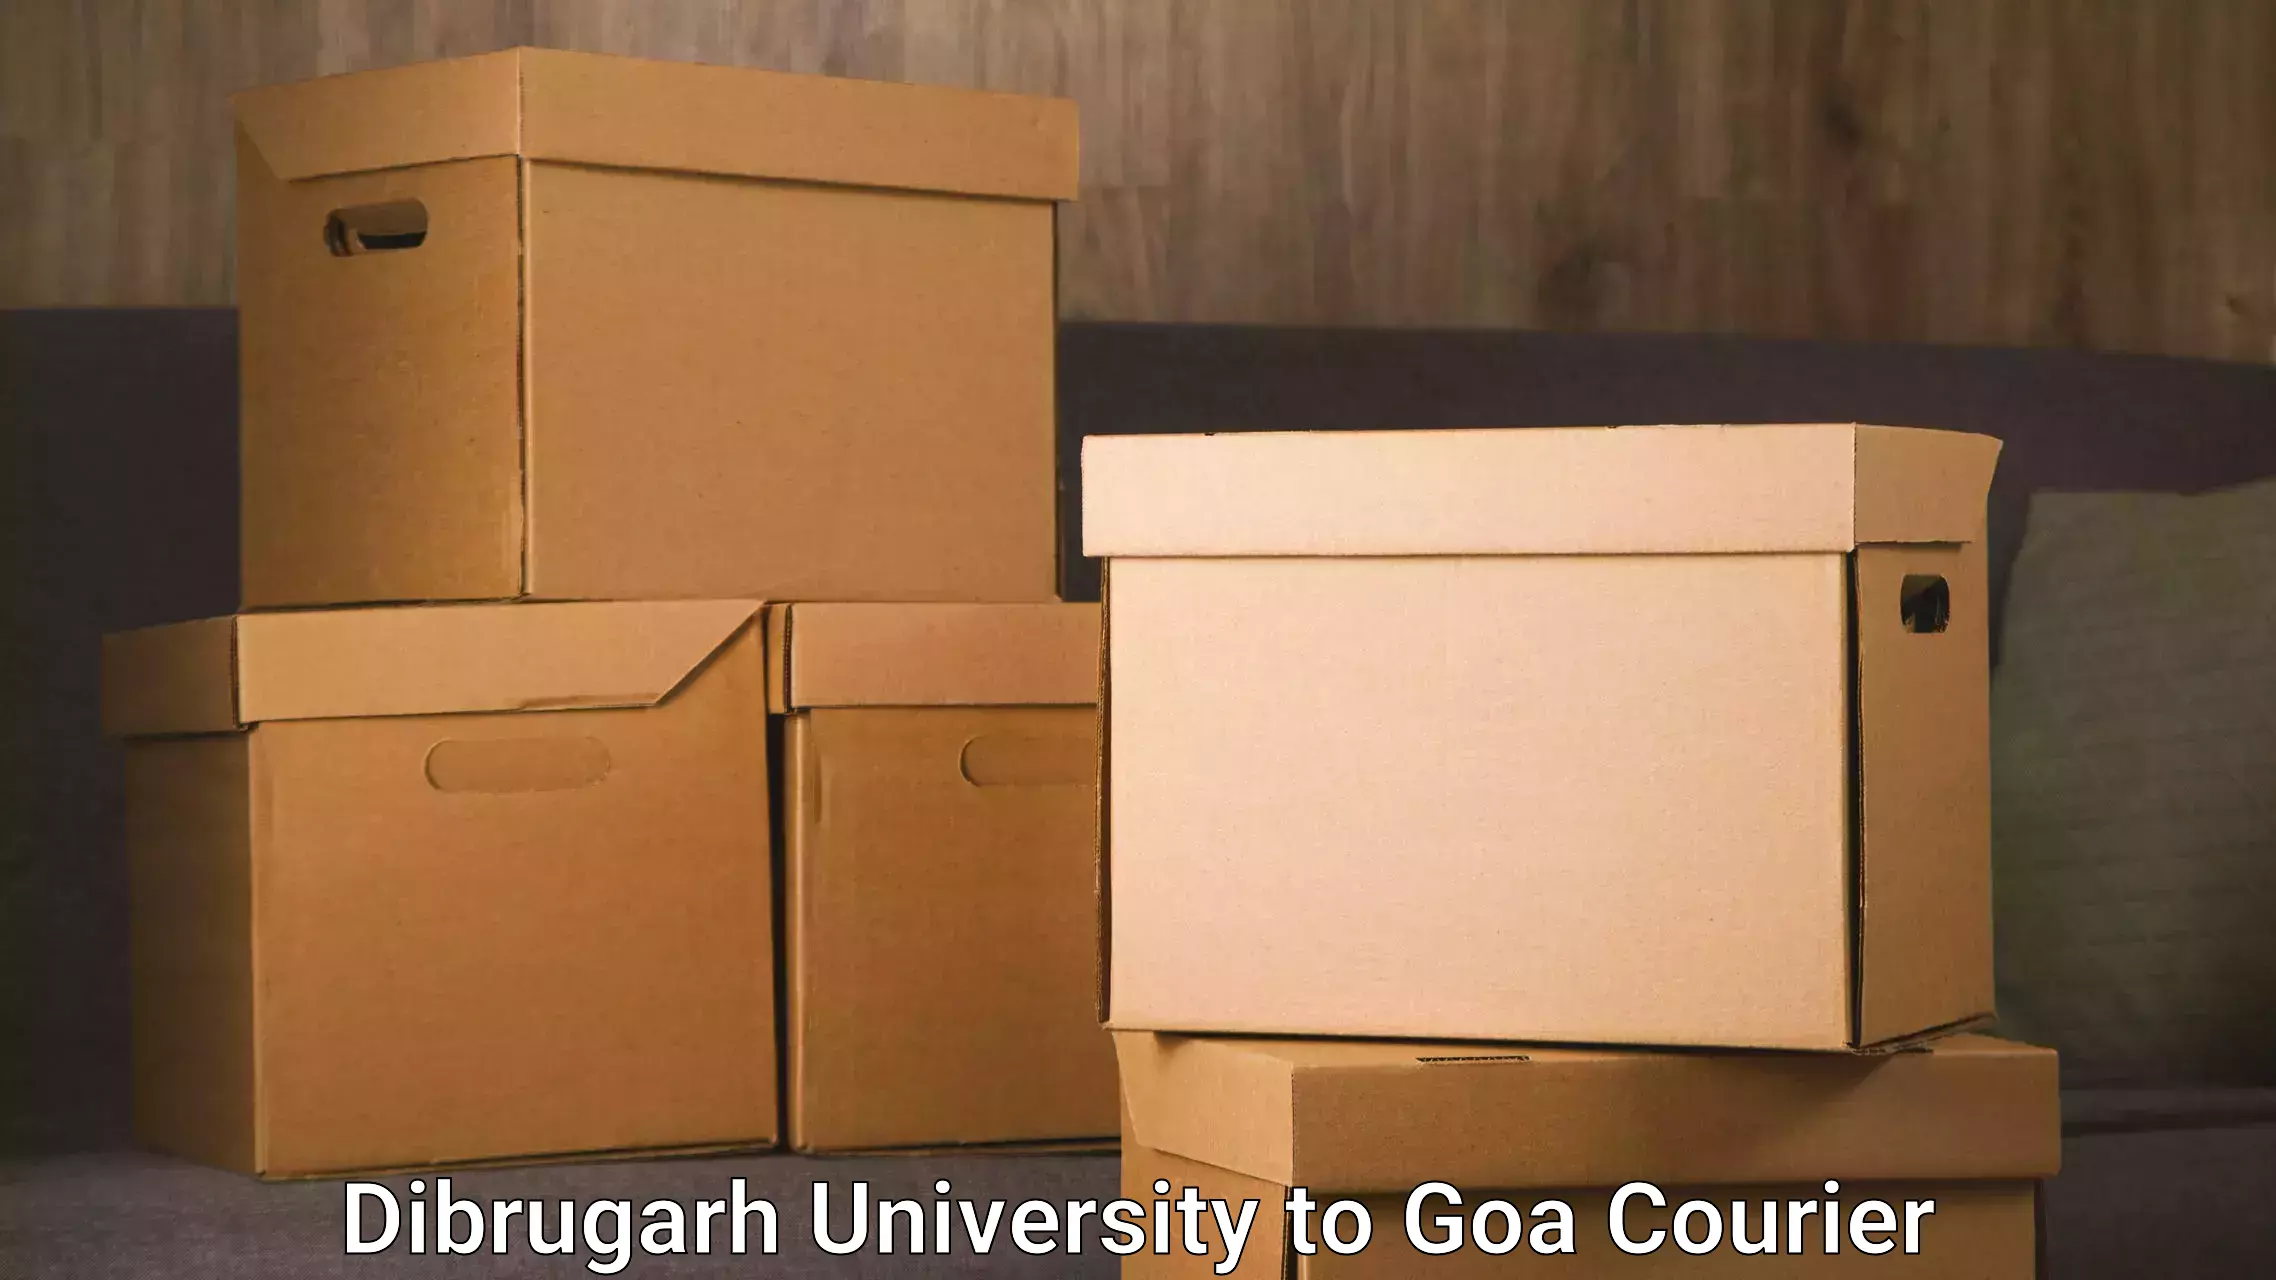 Nationwide courier service Dibrugarh University to Goa